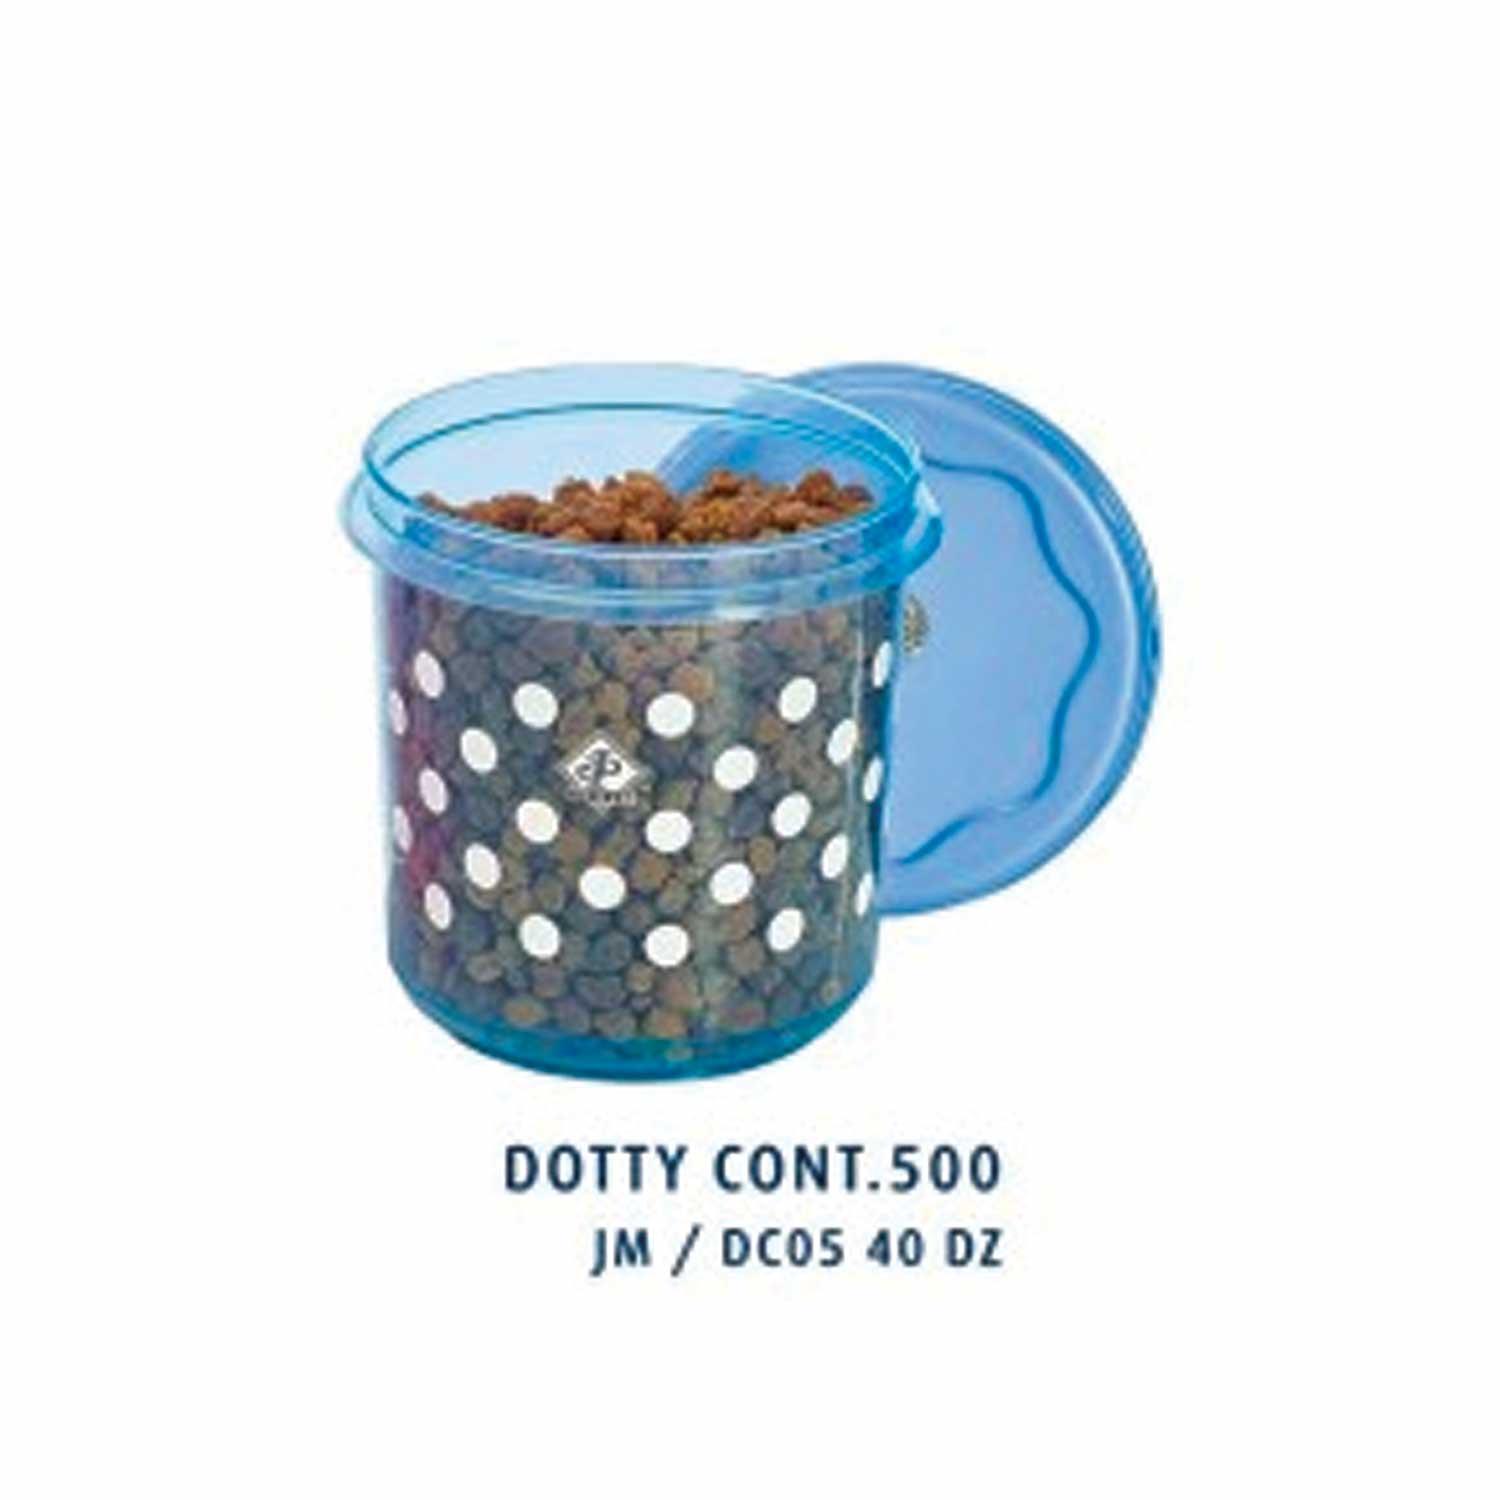 BHAWANI DOTTY CONTAINER 500 (BLUE) 1PC